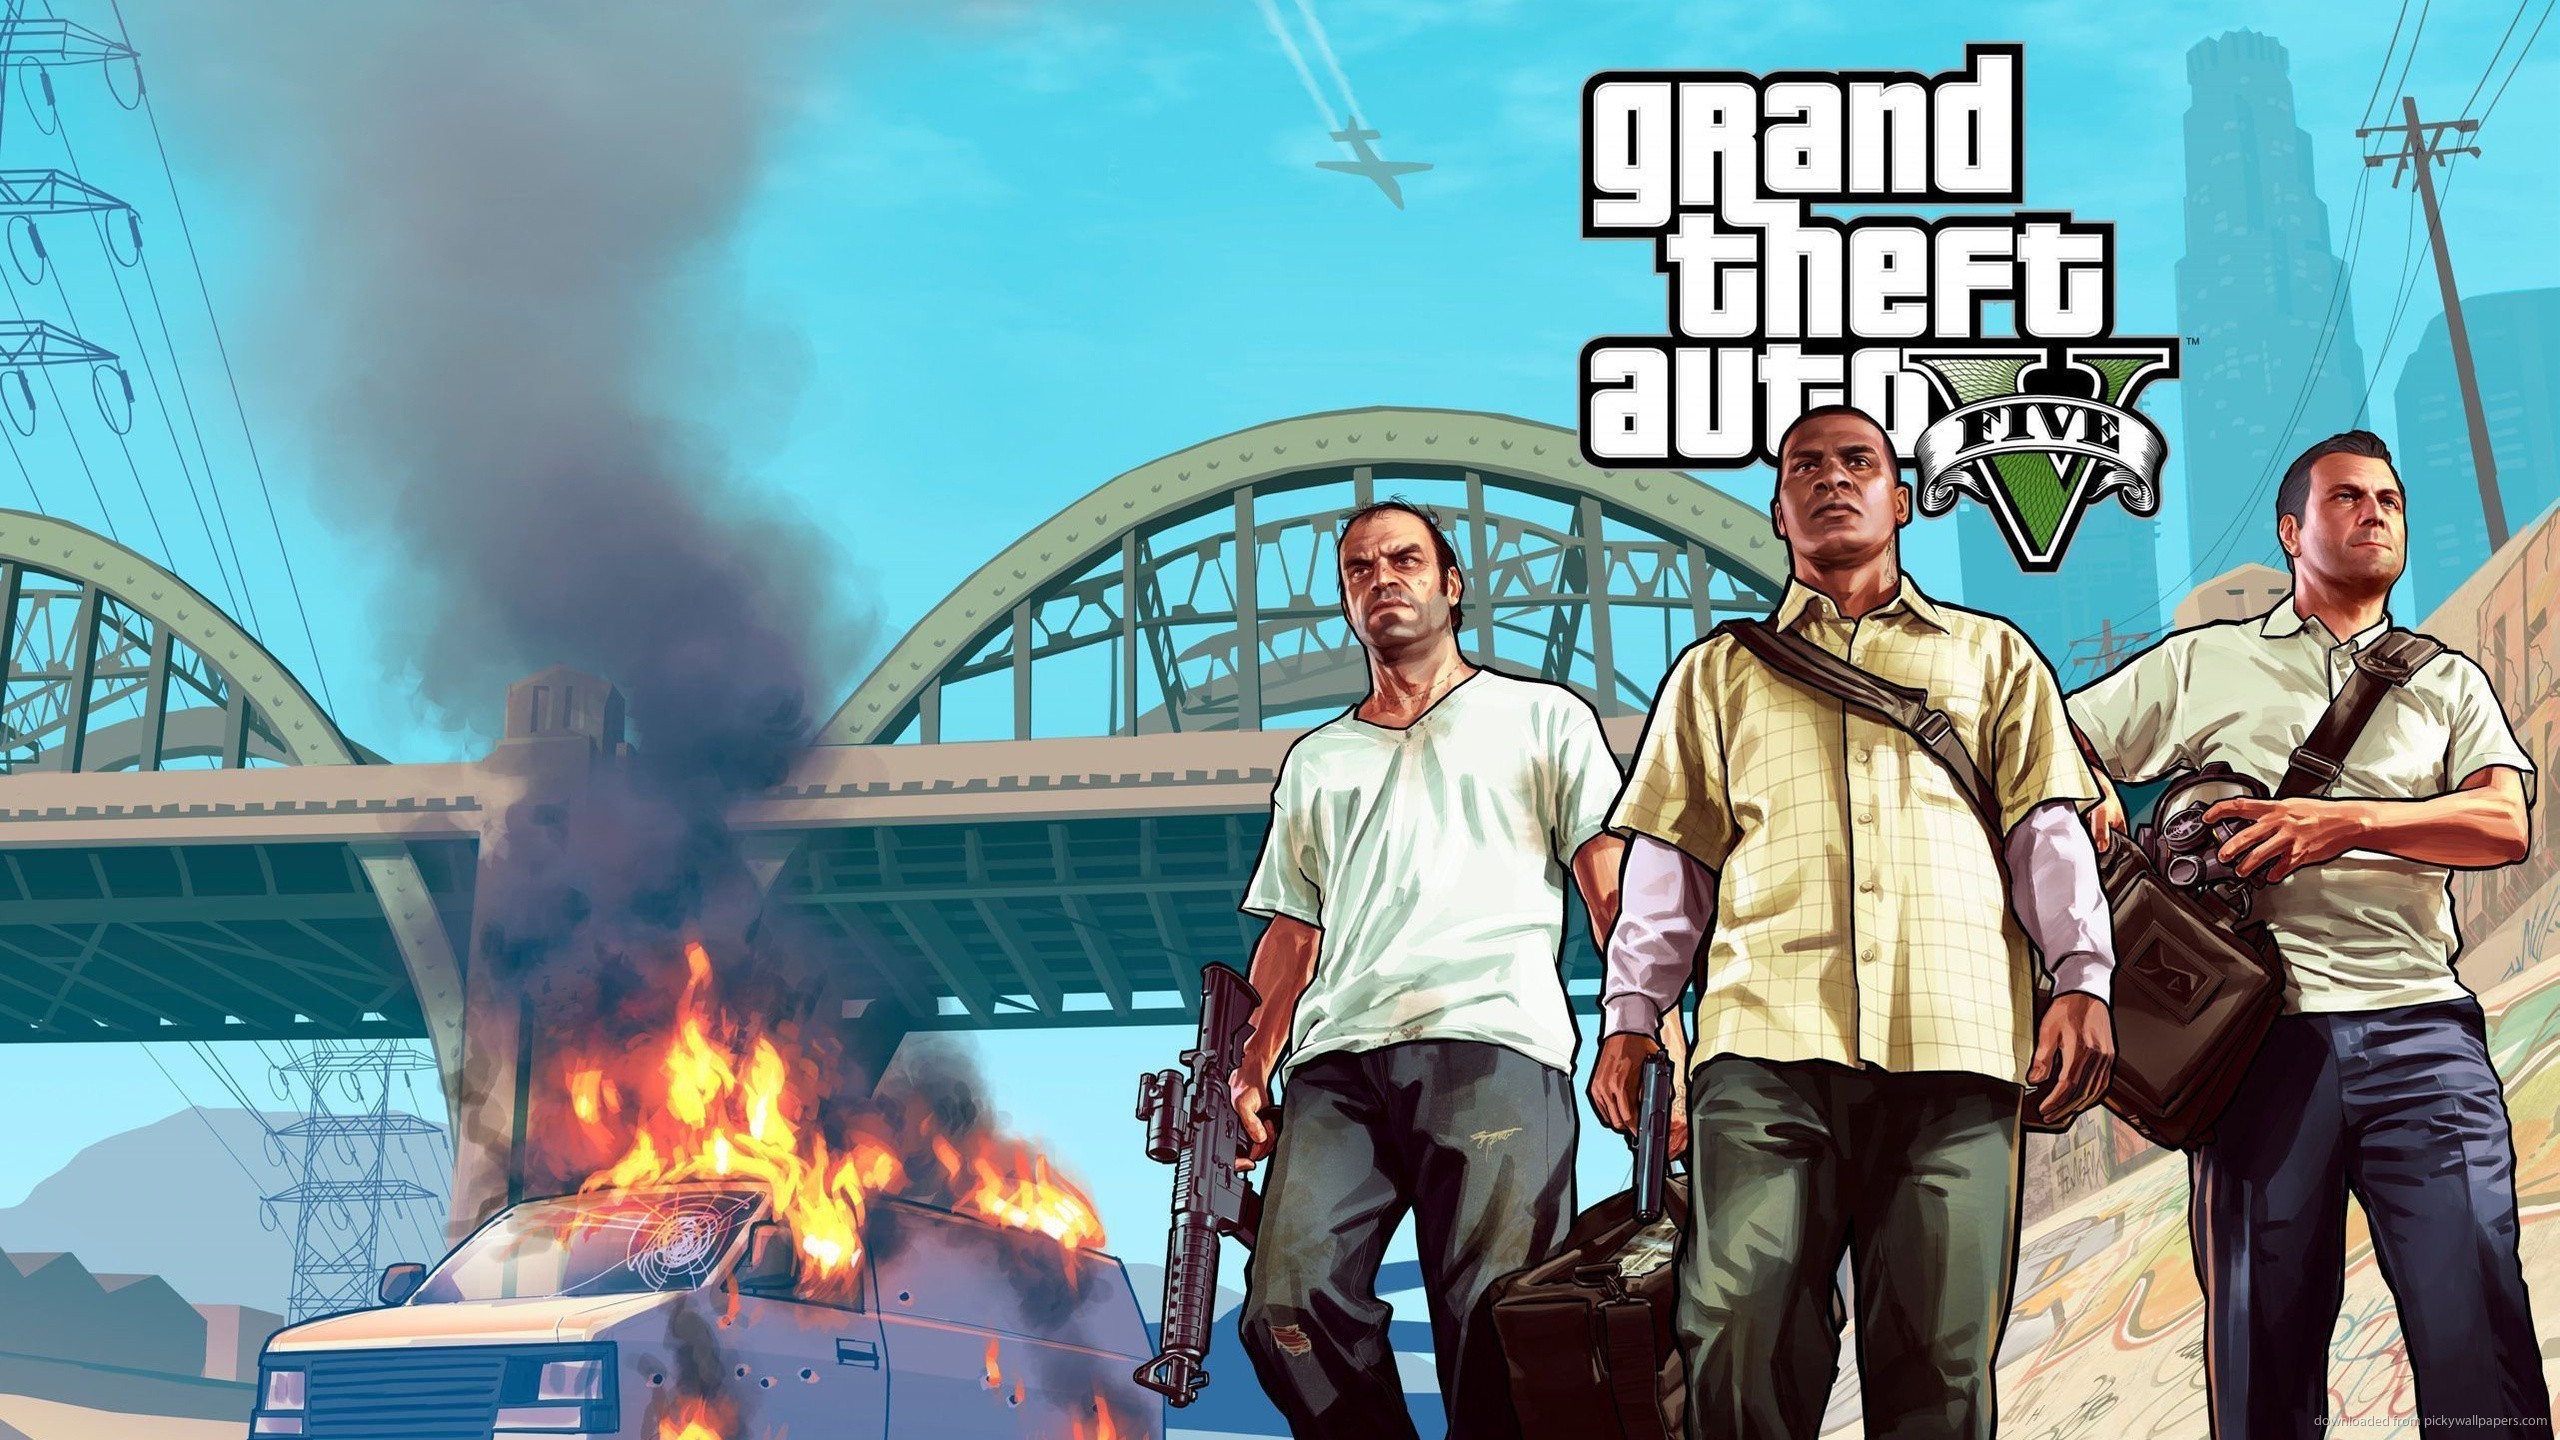 gta v wallpaper,action adventure game,pc game,games,fictional character,adventure game